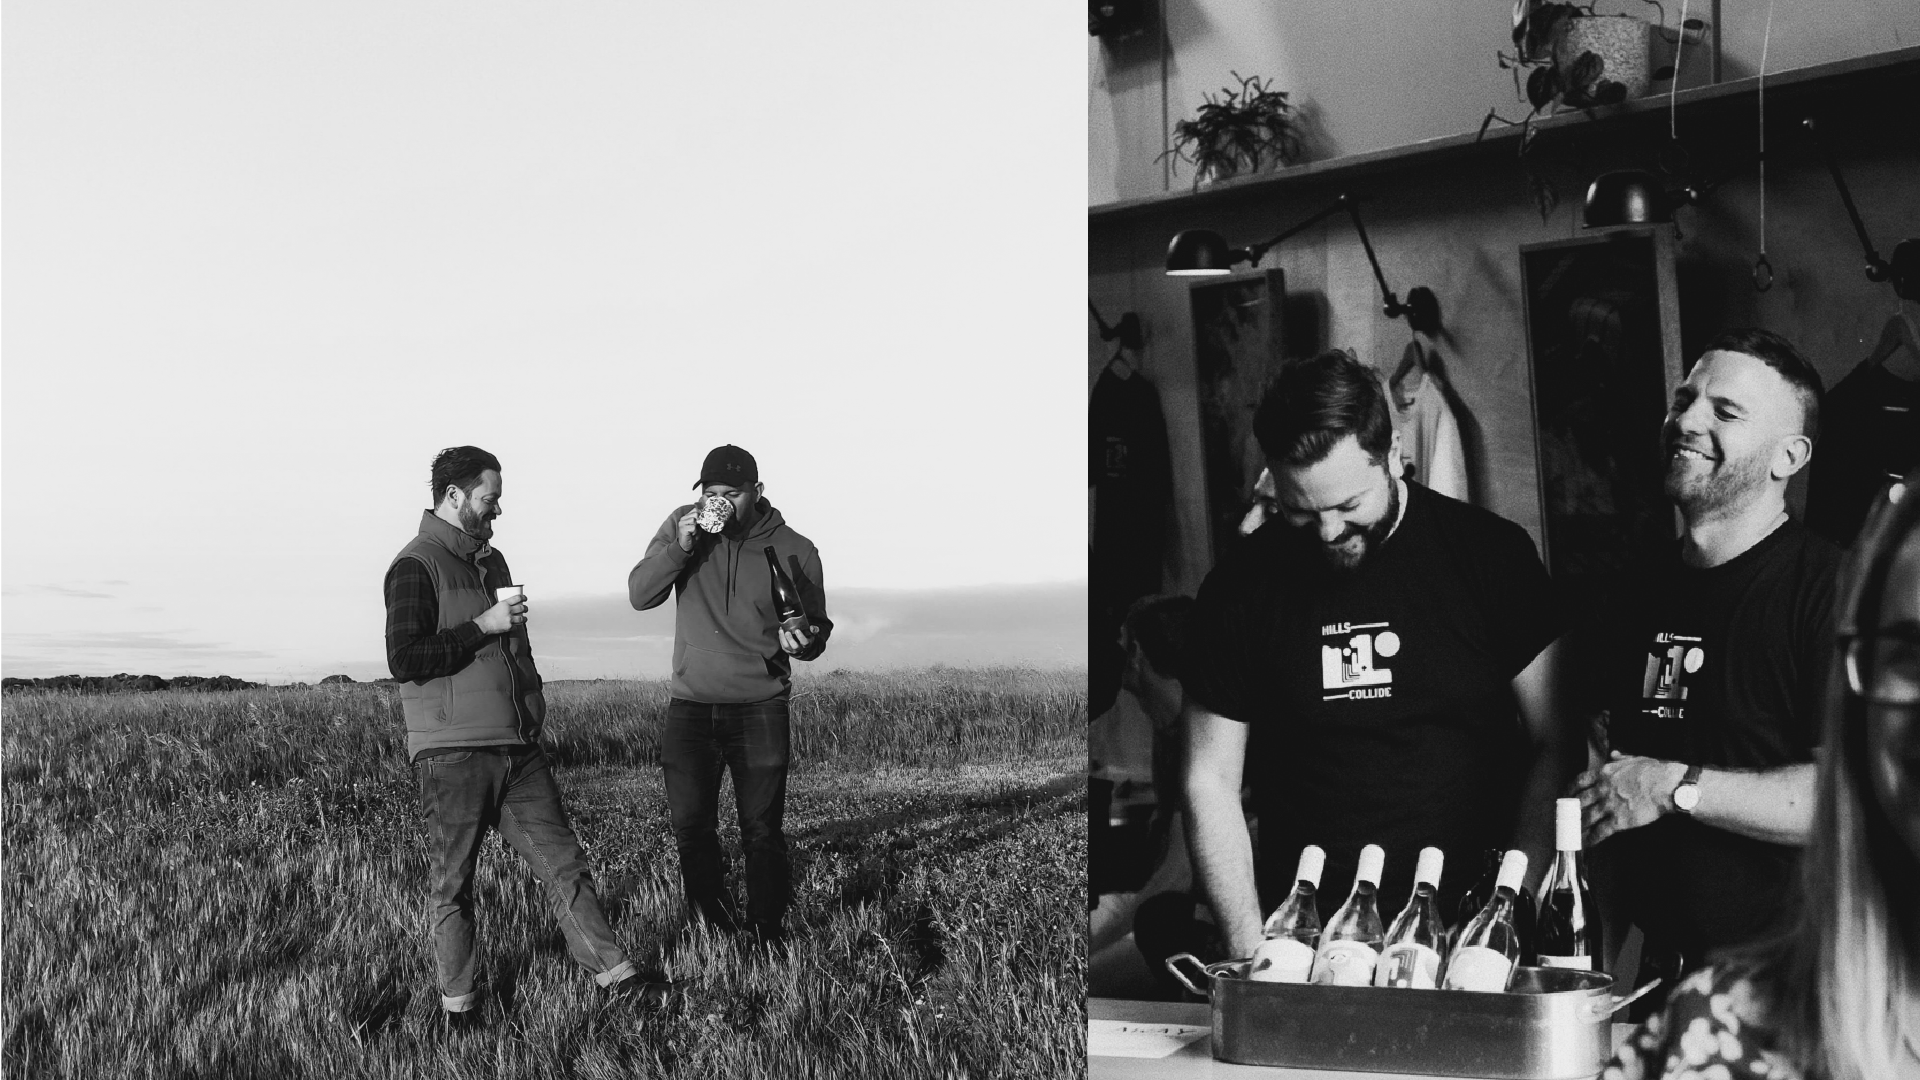 Black and white banner image. Right image: Hills Collide owners, Mitch (Left) & Shane (Right) standing behind bottles of their wines whilst laughing and smiling happily. Left image is Mitch (left) & Shane (right) in an open field drinking their wine.